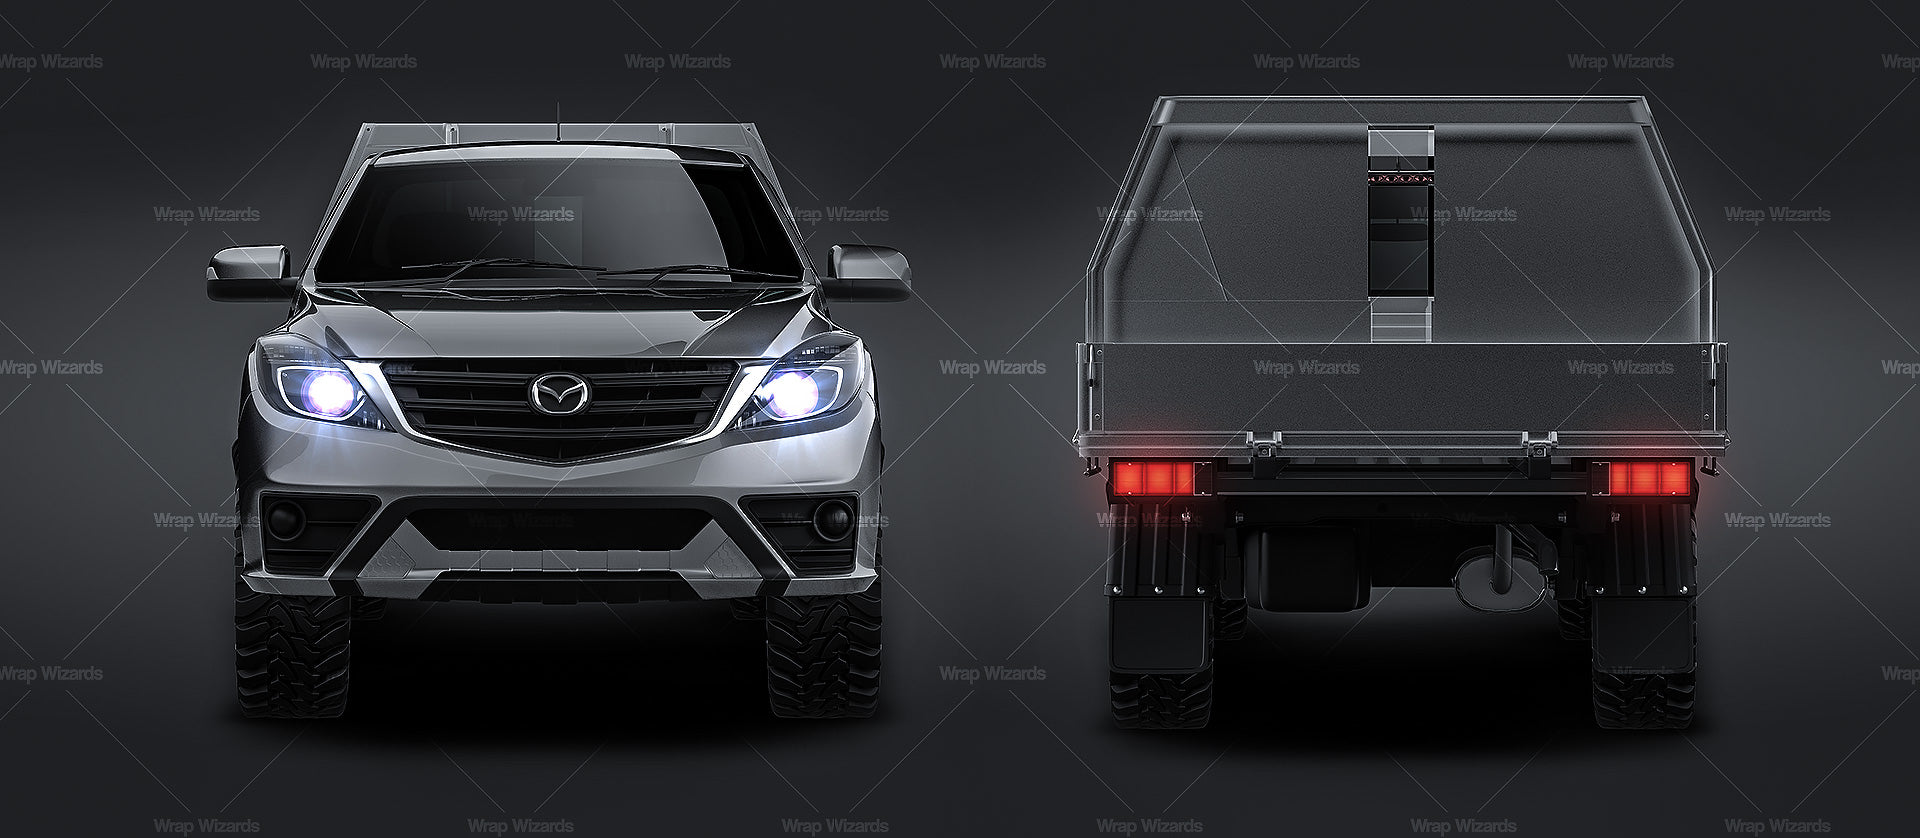 Mazda BT-50 Freestyle Cab Alloy Tray with UTE tool box 2021 - Truck/Pick-up Mockup